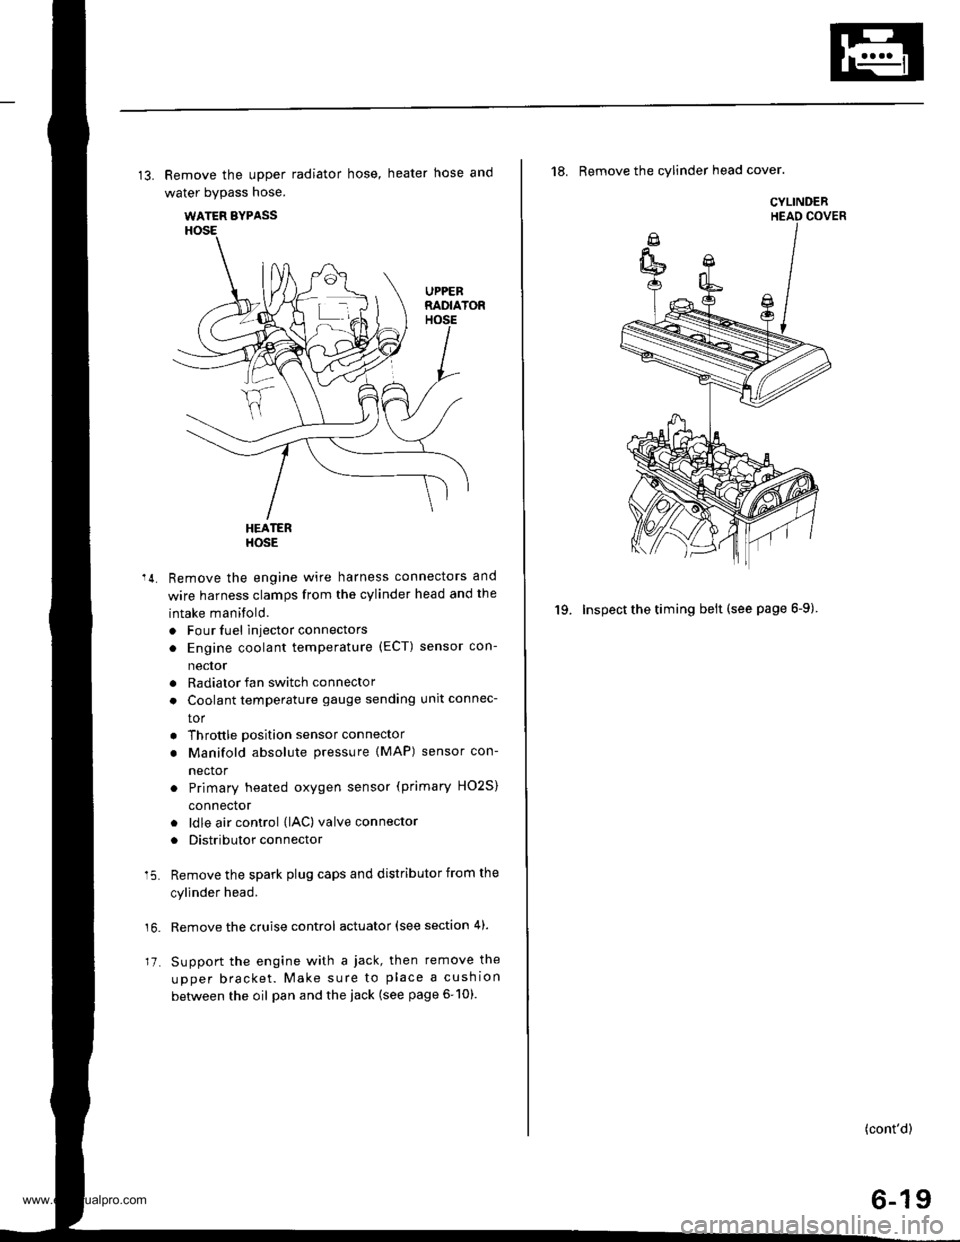 HONDA CR-V 1999 RD1-RD3 / 1.G Workshop Manual 
13. Remove the upper radiator hose, heater hose and
water bypass hose.
WATER BYPASS
UPPEBRADIATORHOSE
17
HEATERHOSE
Remove the engine wire harness connectors and
wire harness clamps from the cylinder